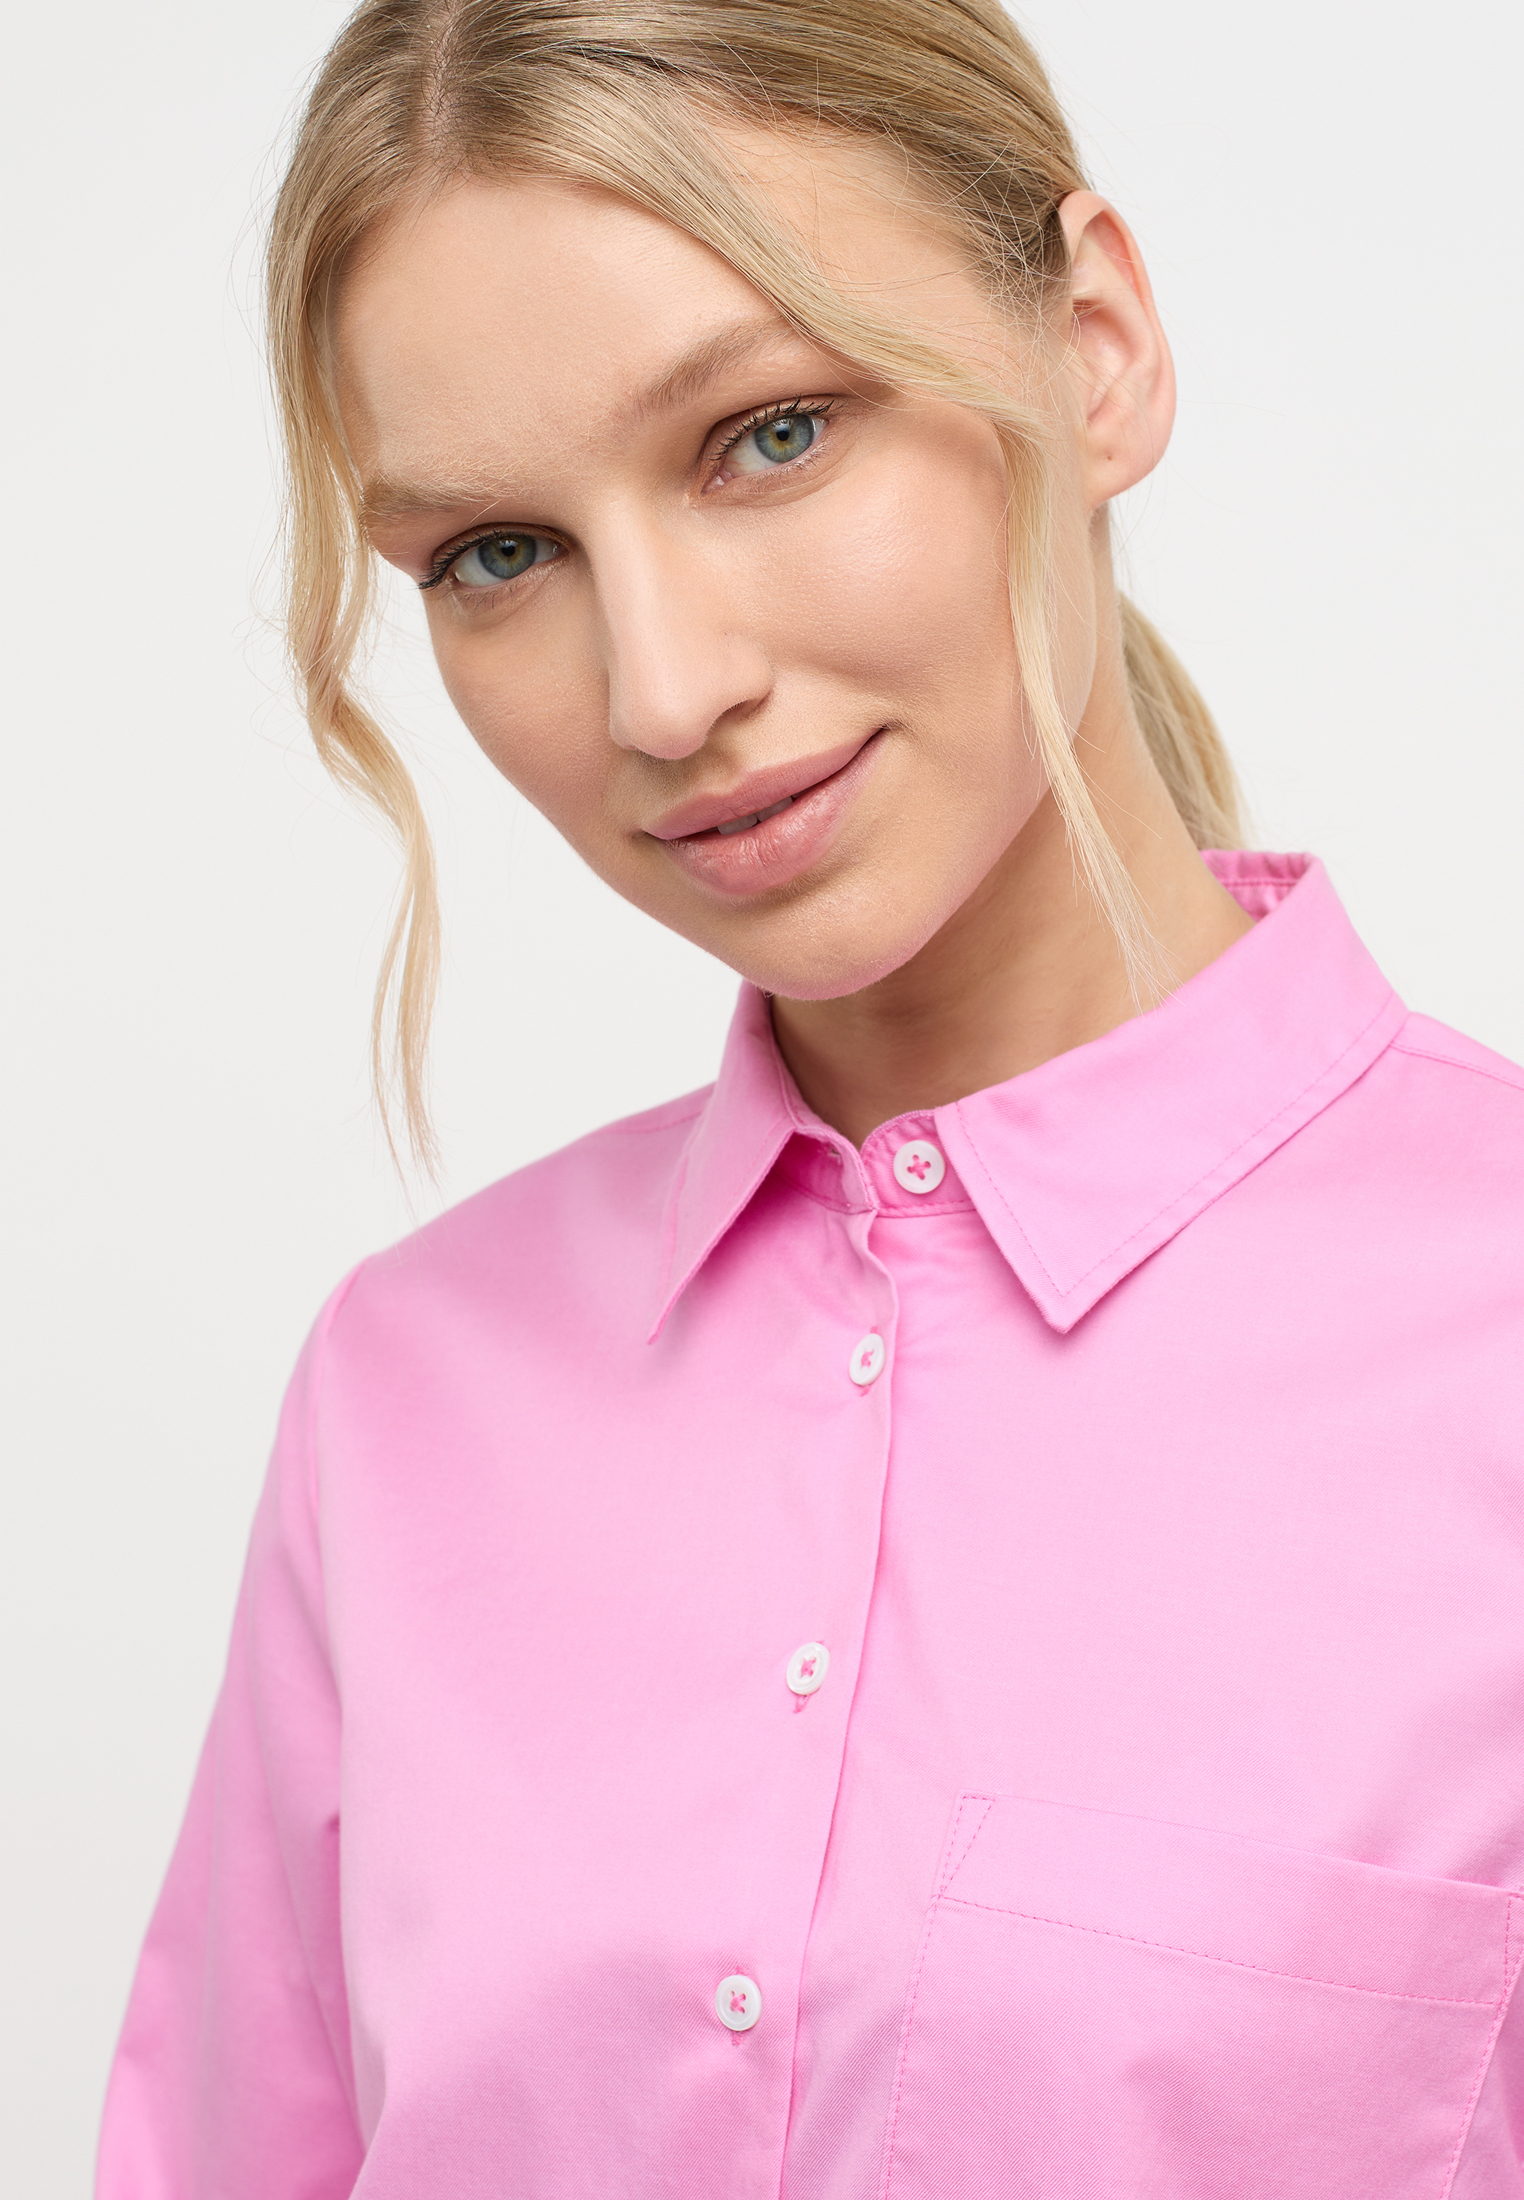 Soft Luxury Shirt sleeve pink long pink plain | in | 2BL03851-15-21-44-1/1 | 44 Blouse 